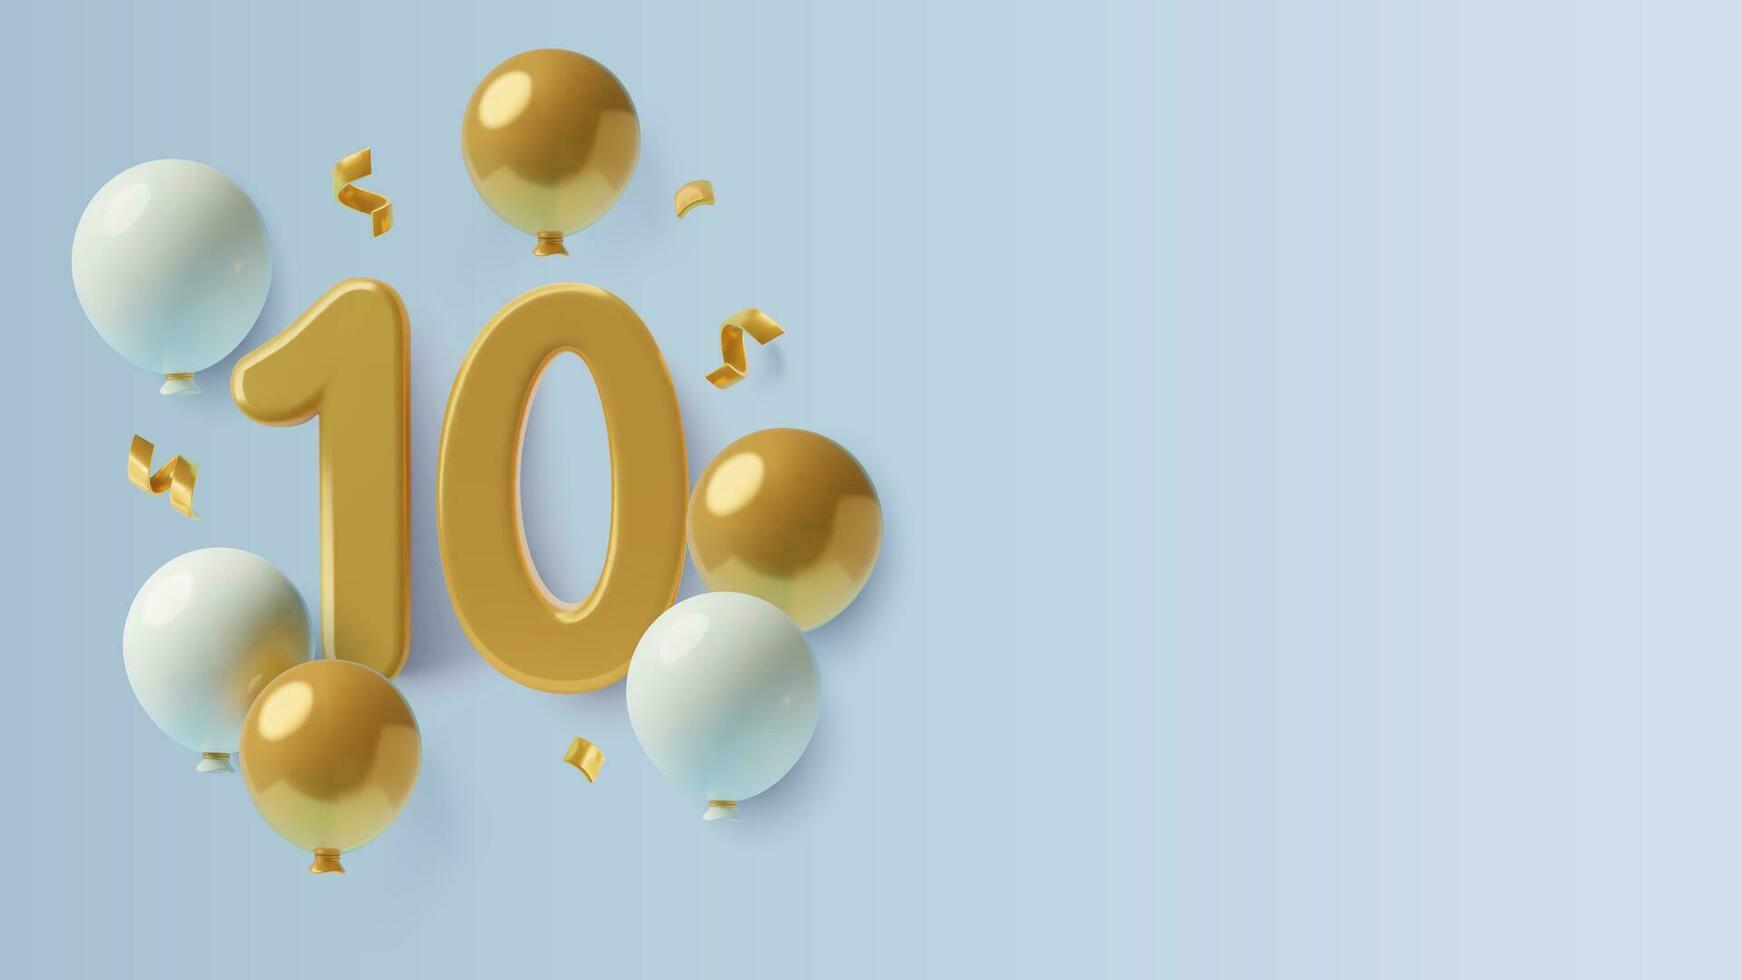 10 years anniversary 3D background with gold ten number balloons and confetti on blue background vector